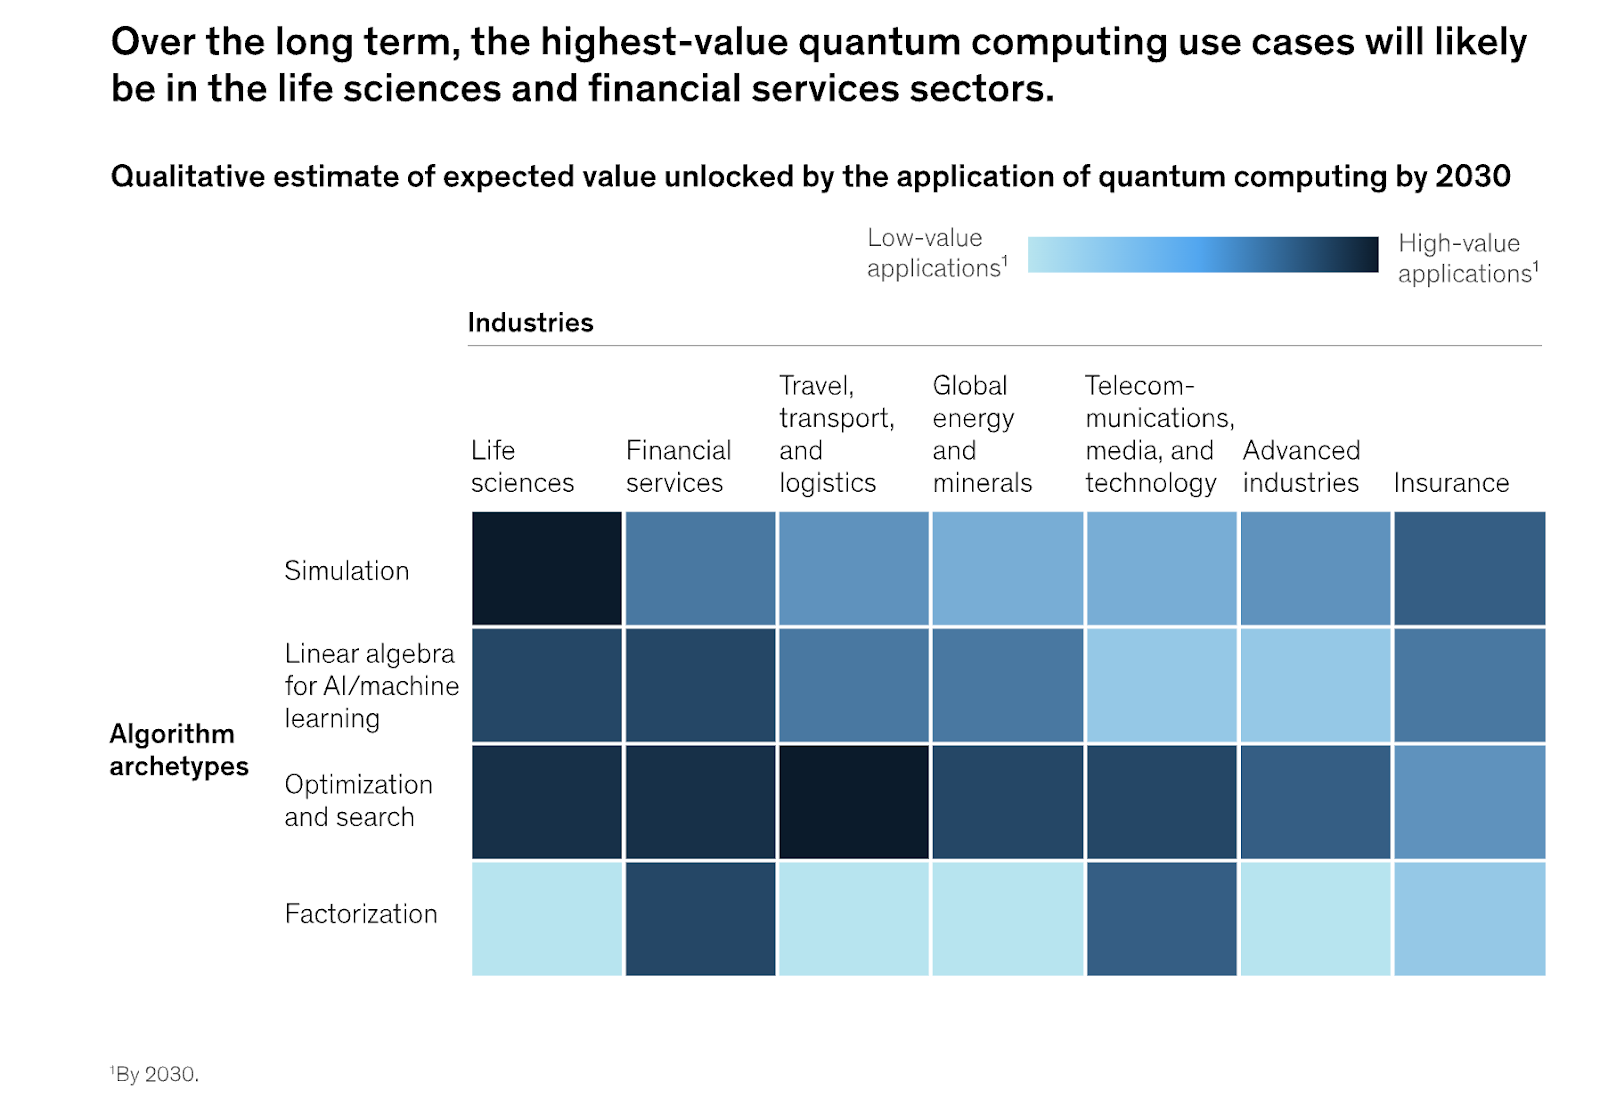 industries stand to gain up to $1.3 trillion in value by 2035, thanks to the problem-solving abilities of quantum computers. 